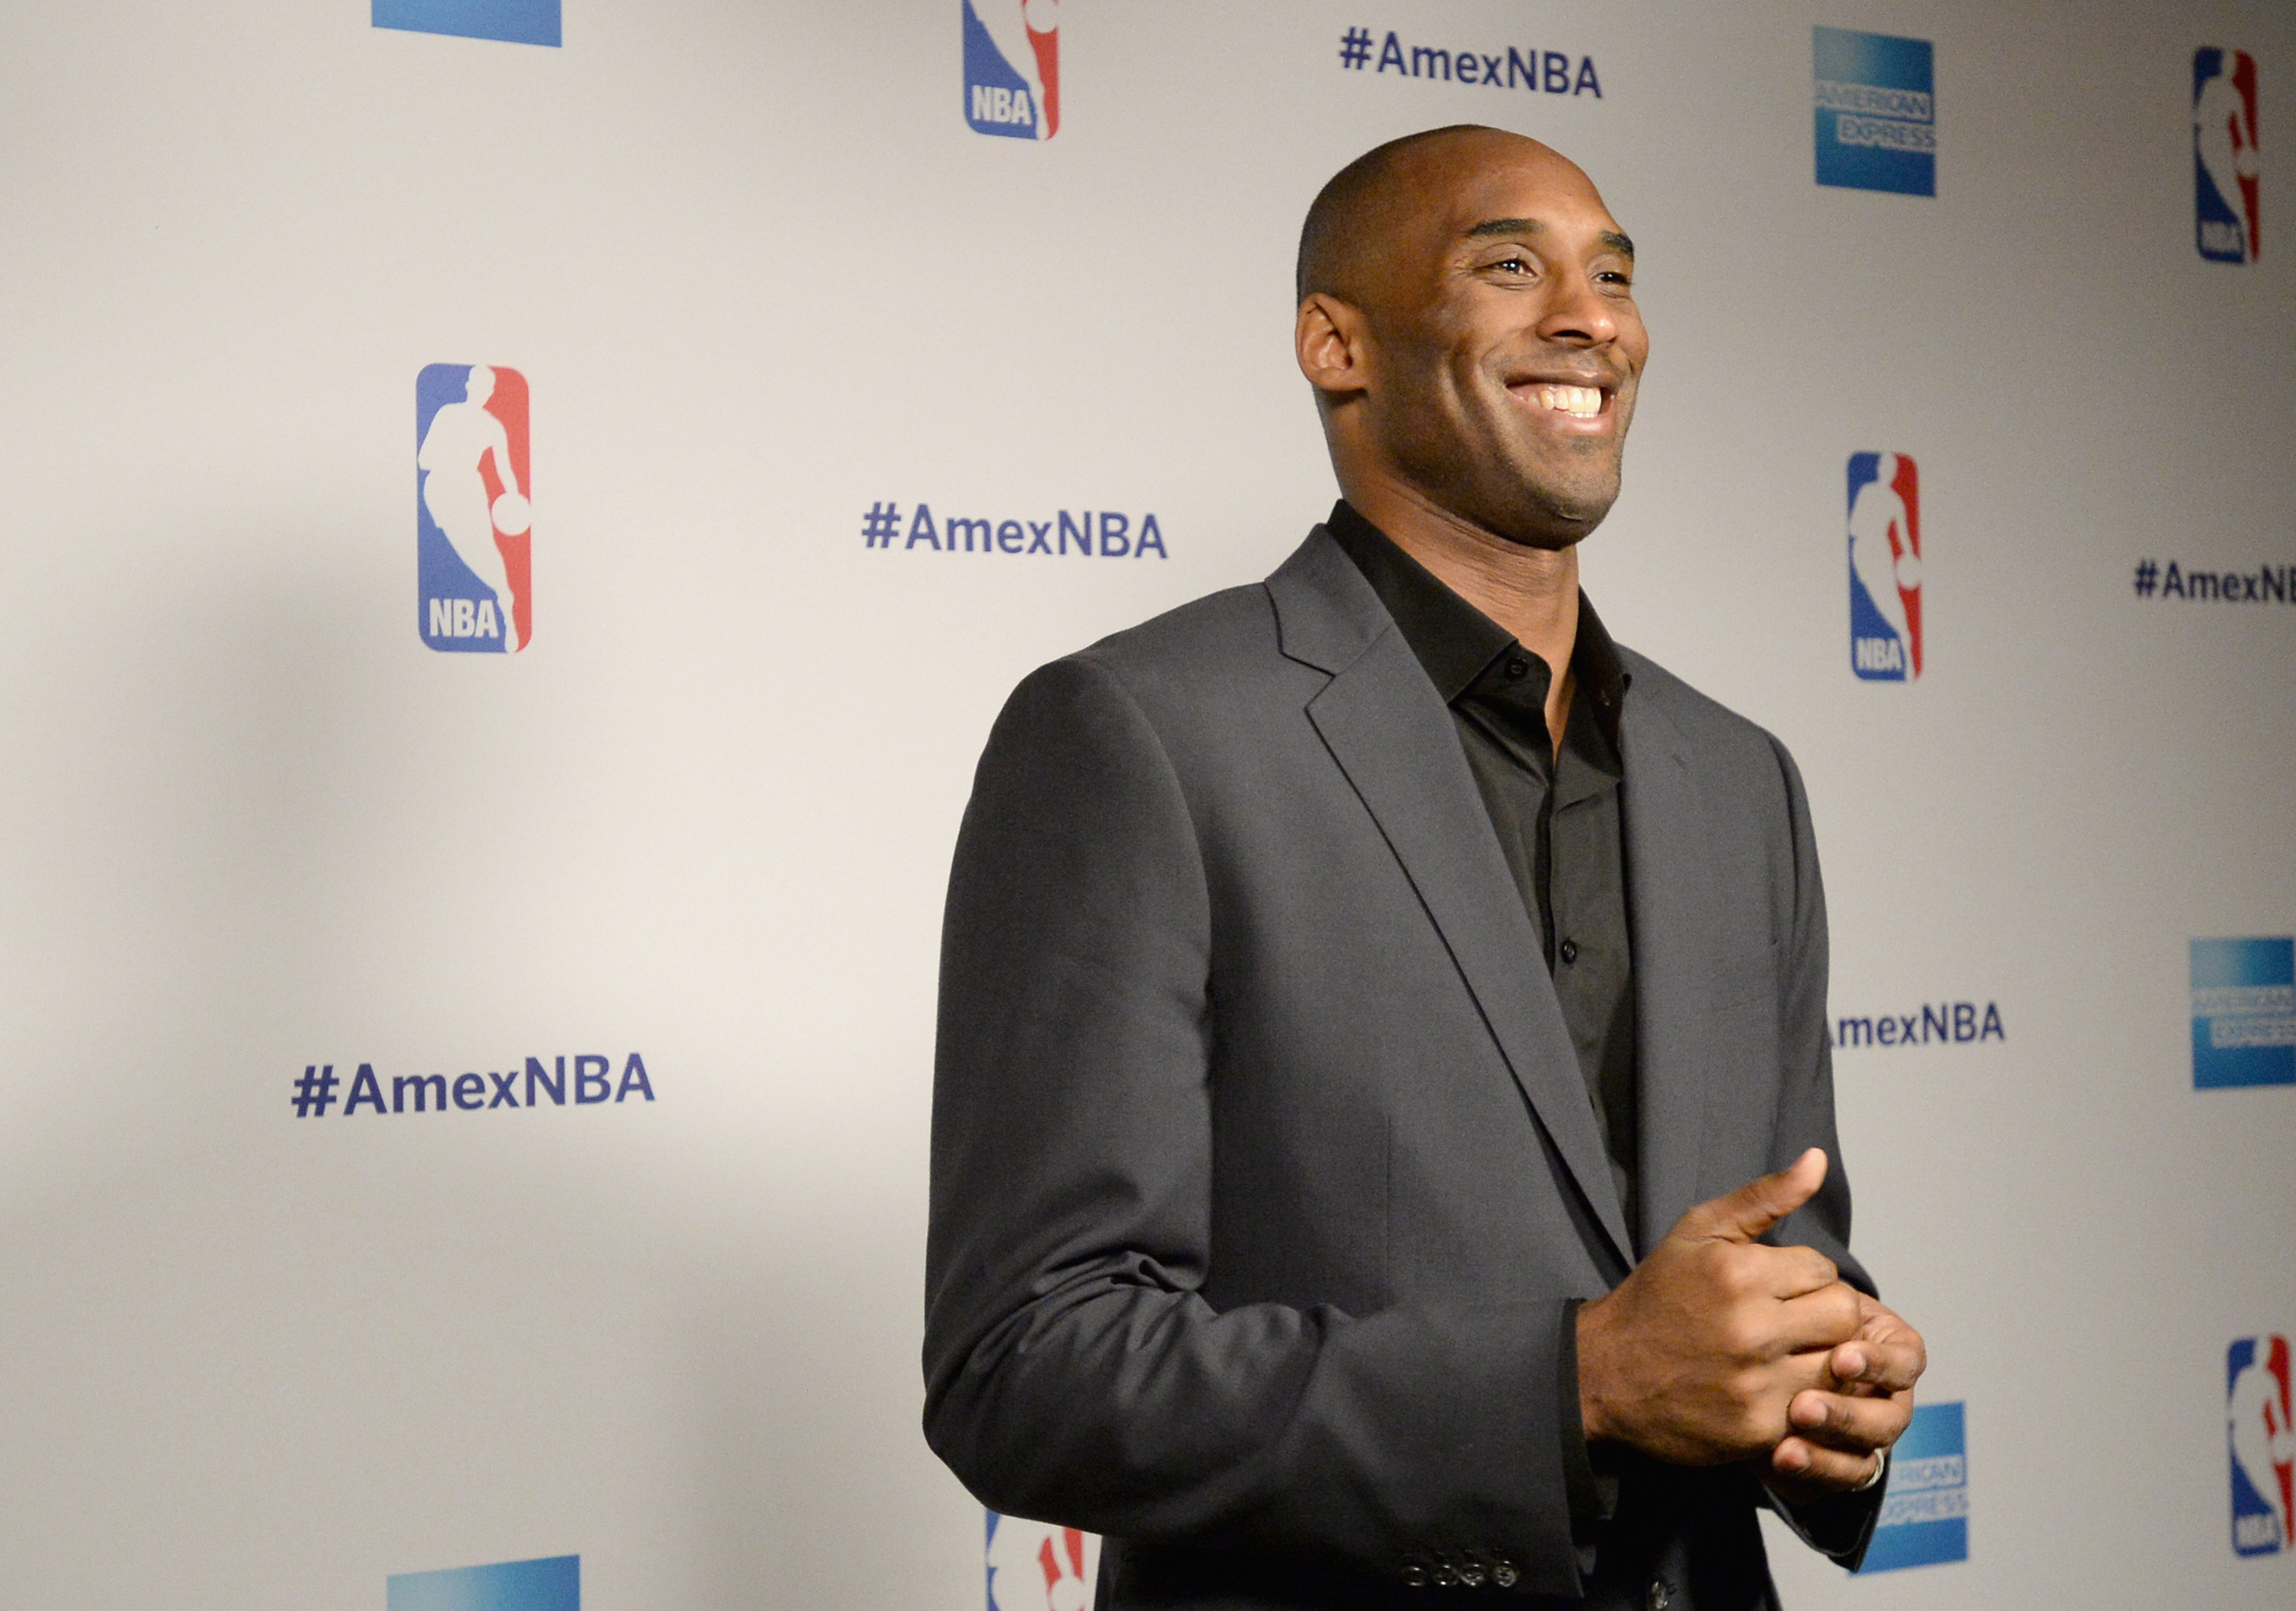 "LOS ANGELES, CALIFORNIA - MARCH 29: American Express Teamed Up With Kobe Bryant at Conga Room on March 29, 2016 in Los Angeles, California. (Photo by Bernstein Associates/Getty Images for American Express )"